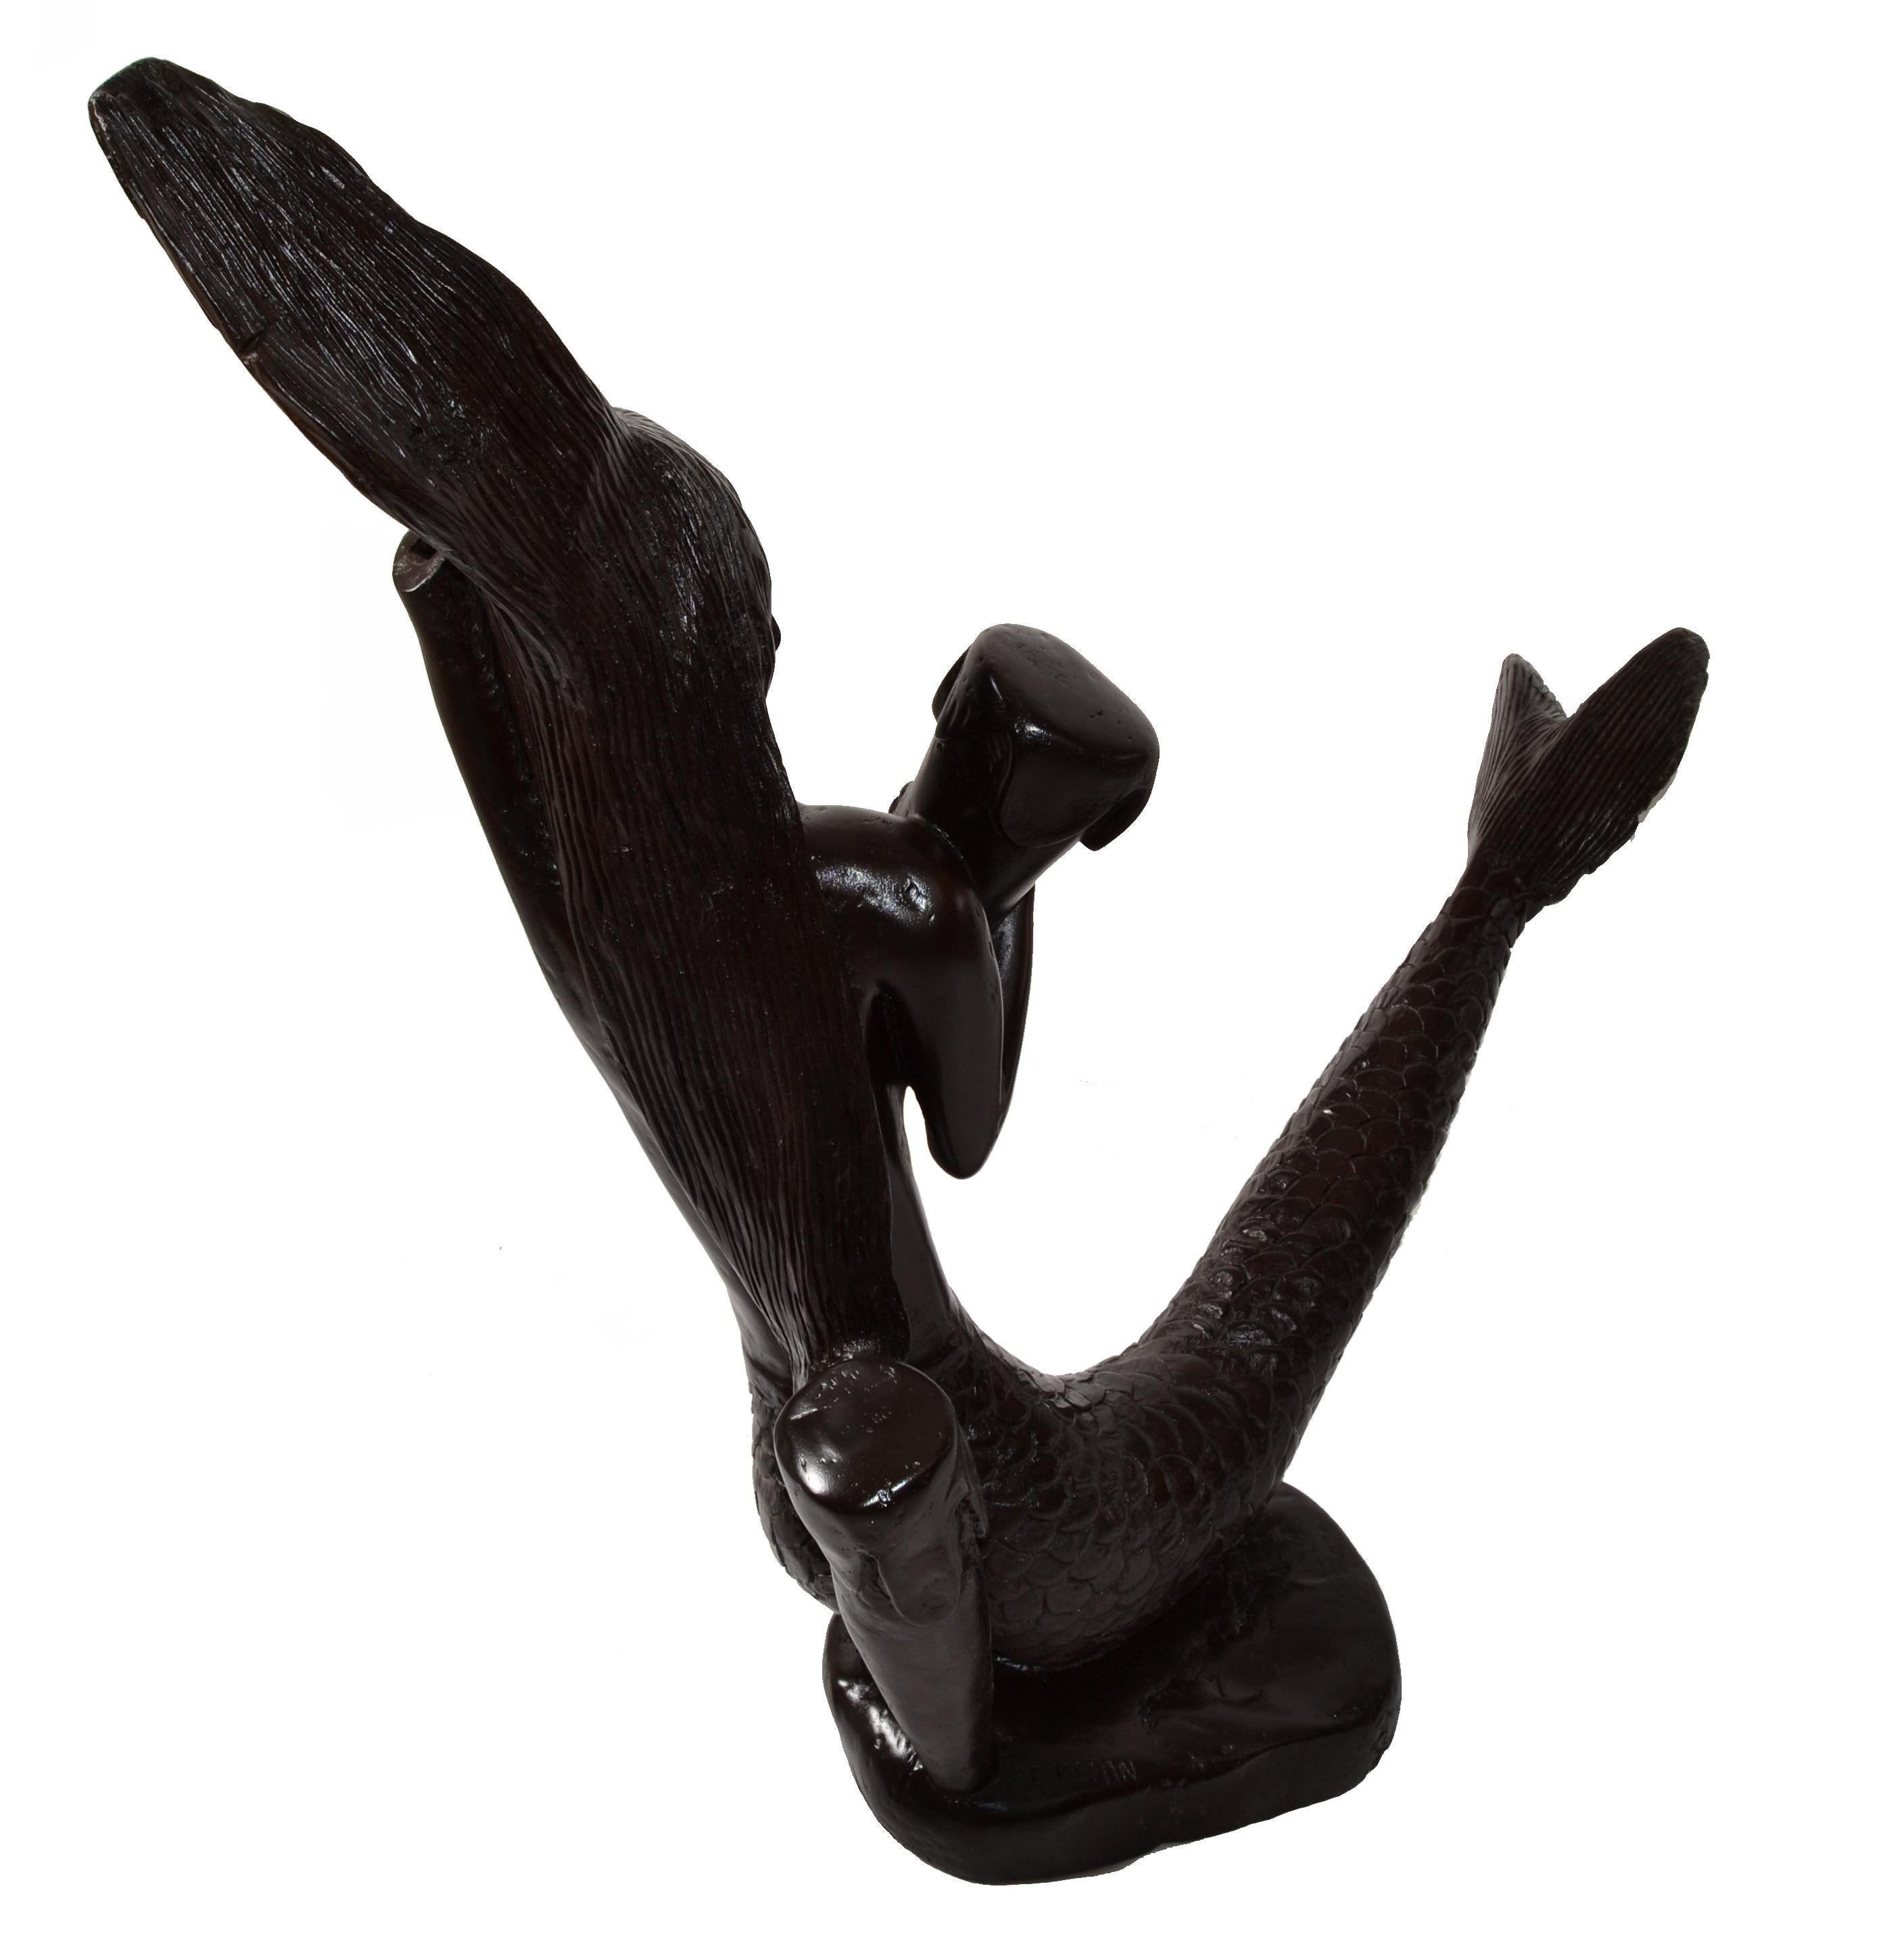 American Late 19th Century Signed Mahogany Nautical Hand-Carved Mermaid Sculpture Statue For Sale